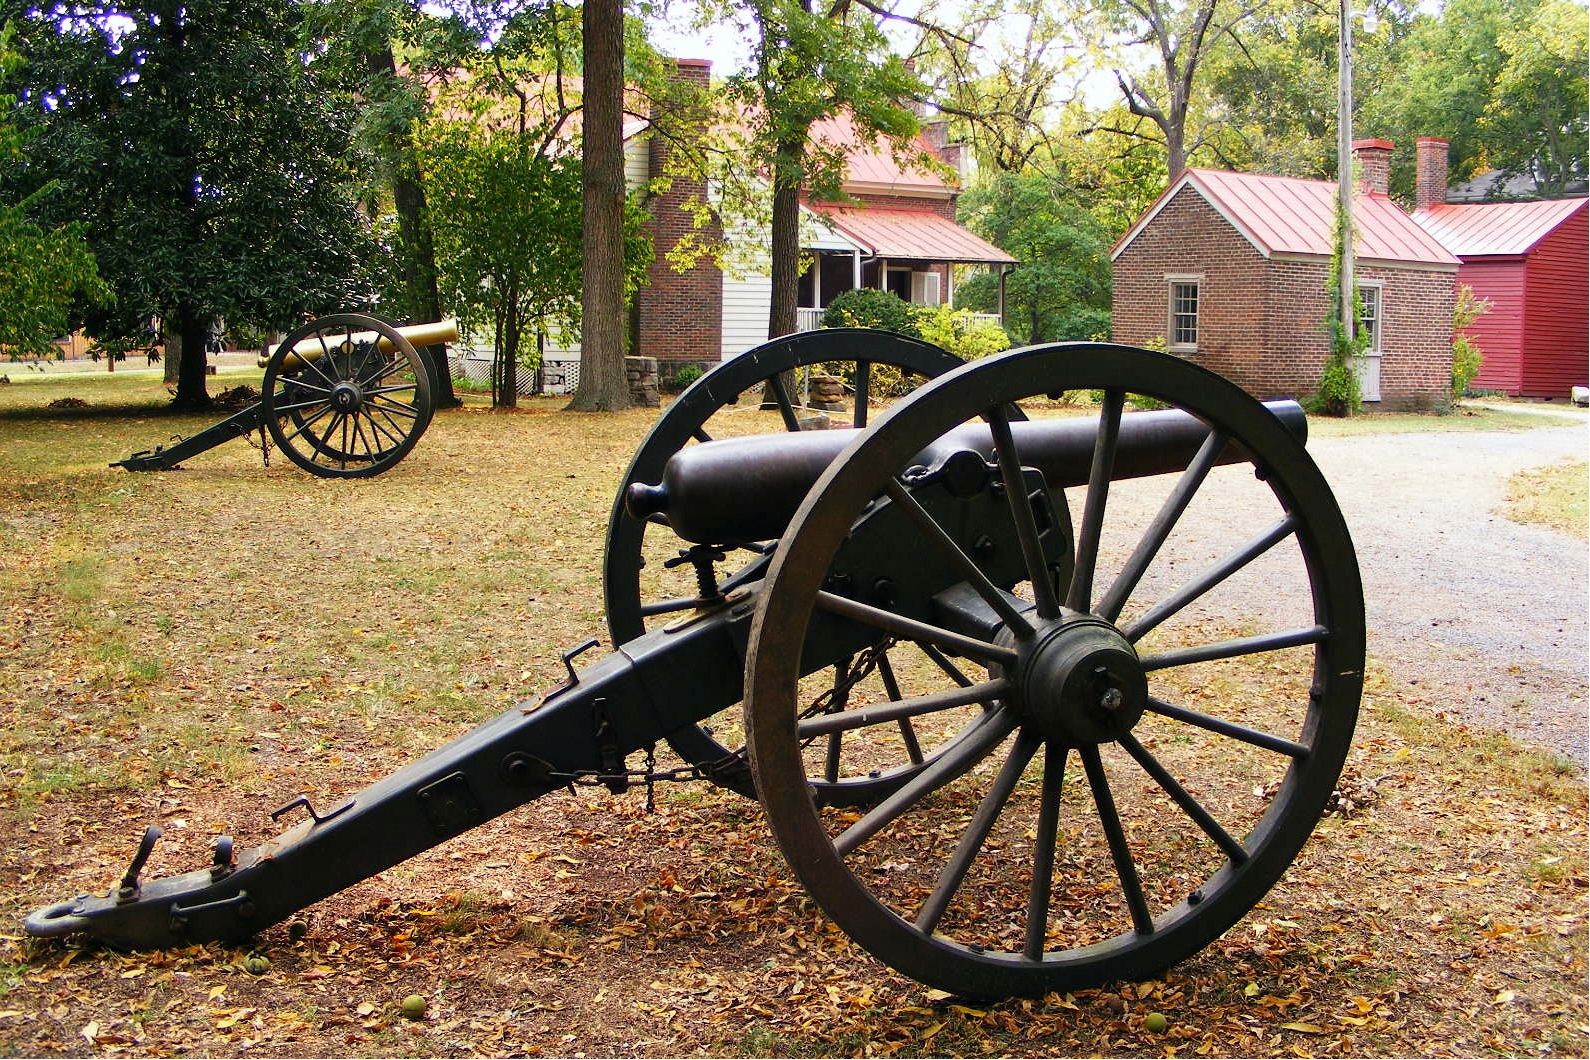 Cannons outside the Carter House in Franklin, Tennessee. Image by Michael Brown / CC BY 2.0